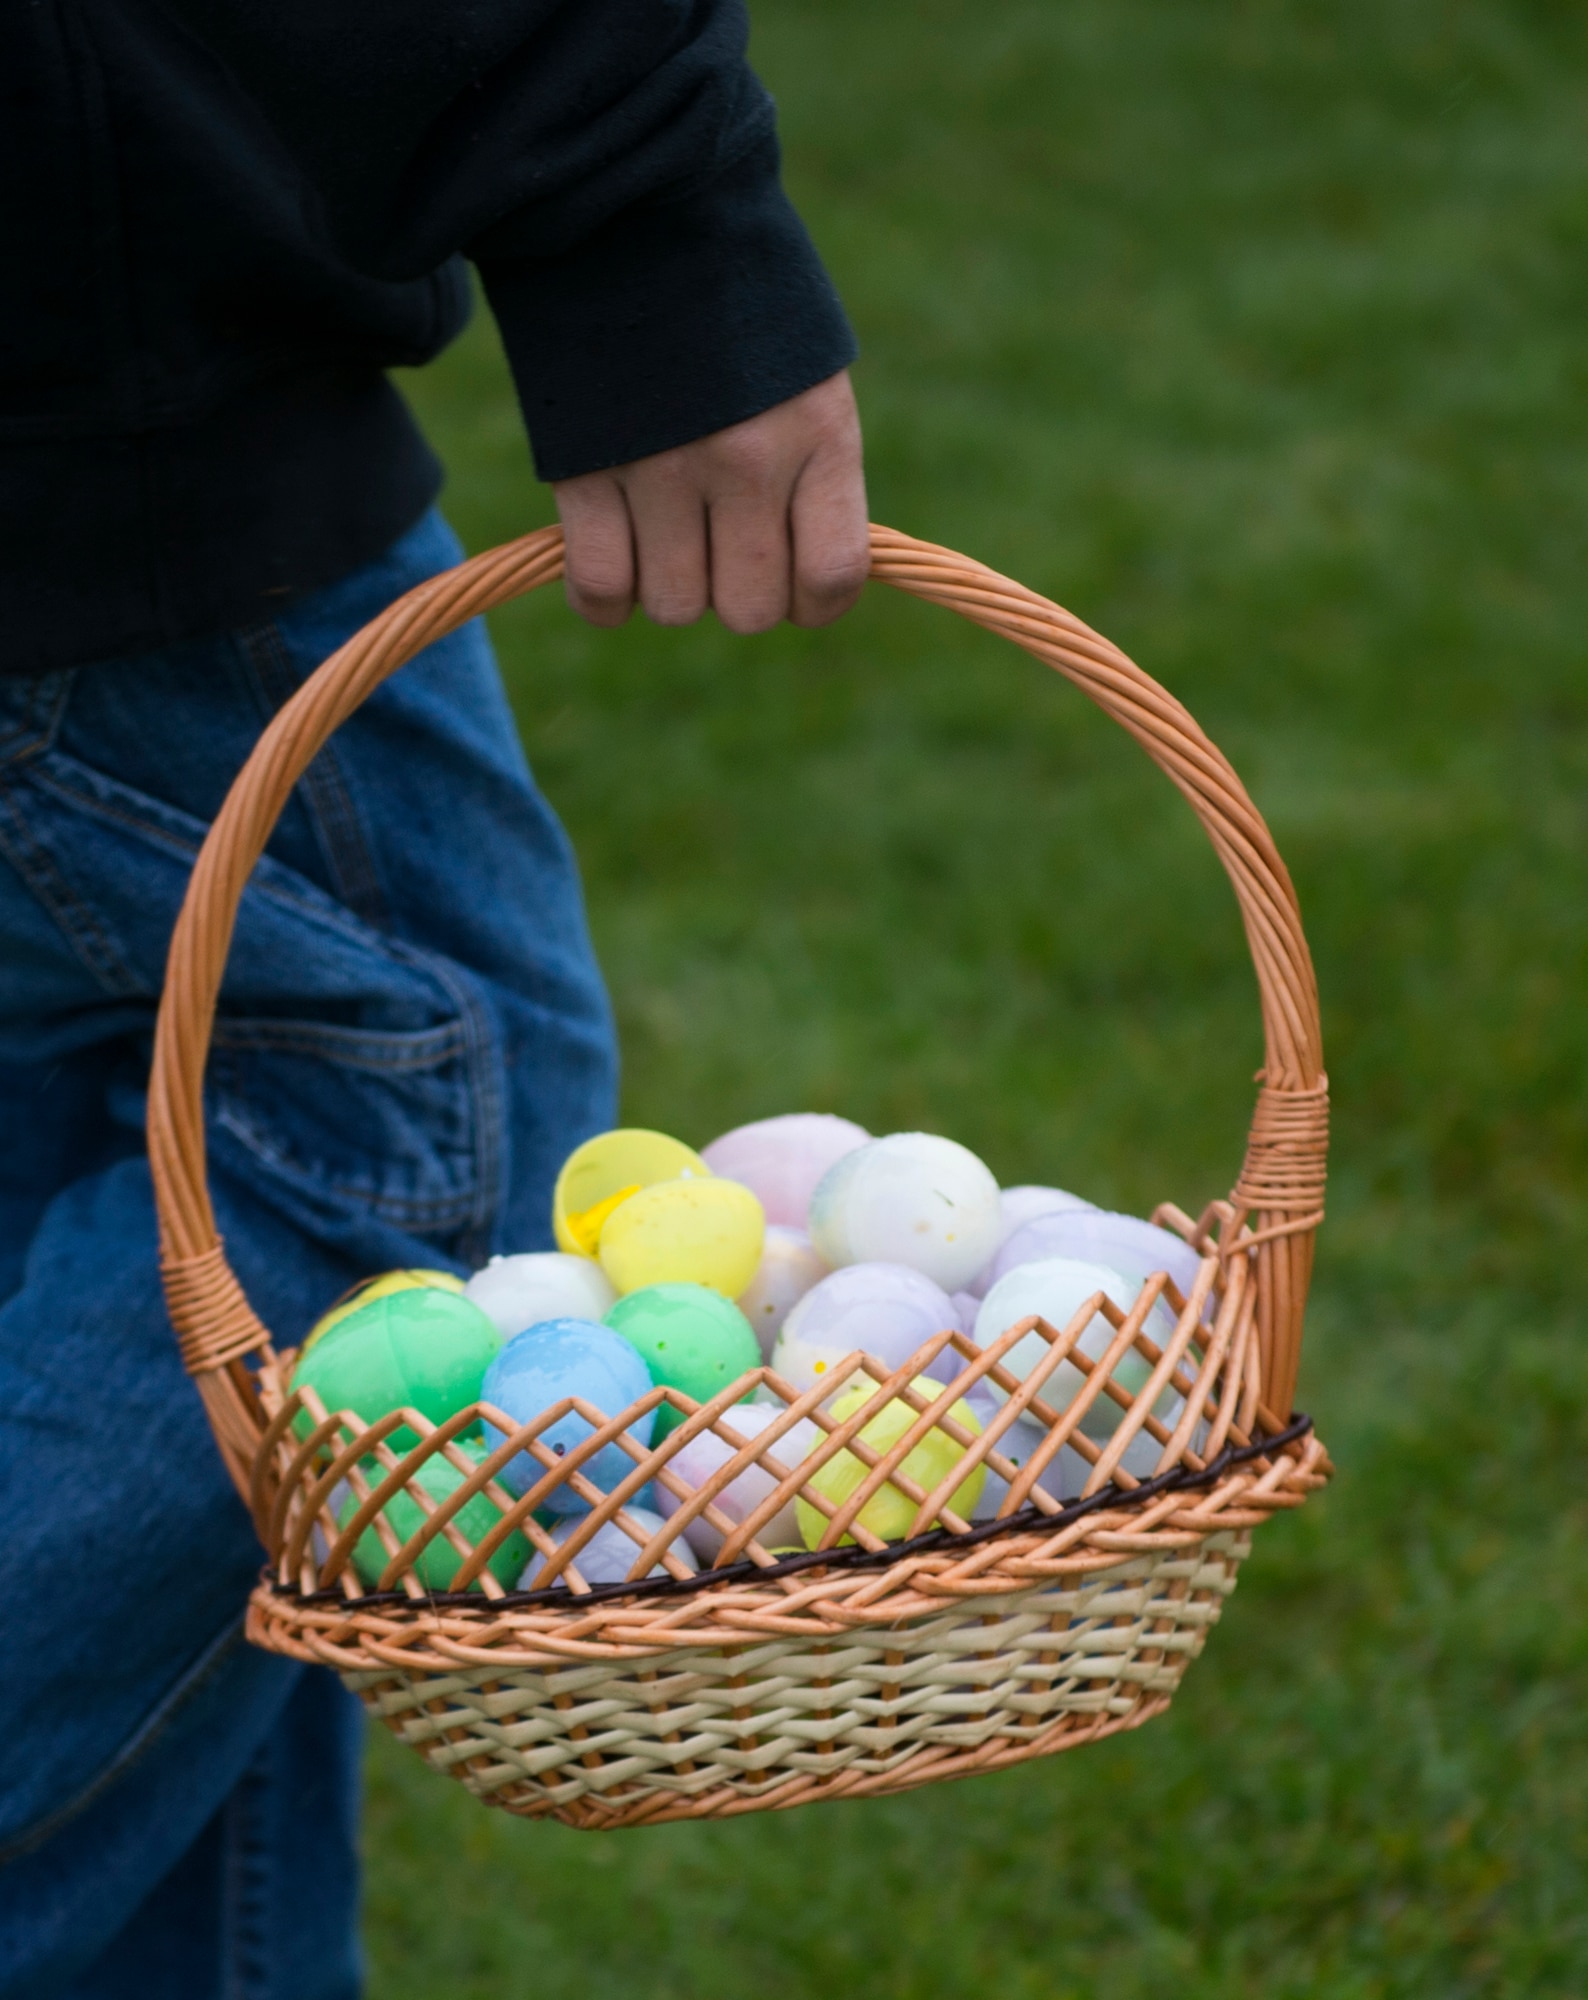 A participant in an Easter egg hunt holds a basket of plastic eggs on the grass field outside Club Eifel at Spangdahlem Air Base, Germany, April 4, 2015. The plastic eggs contained candy, toys and other prizes. (U.S. Air Force photo by Airman 1st Class Luke Kitterman/Released)